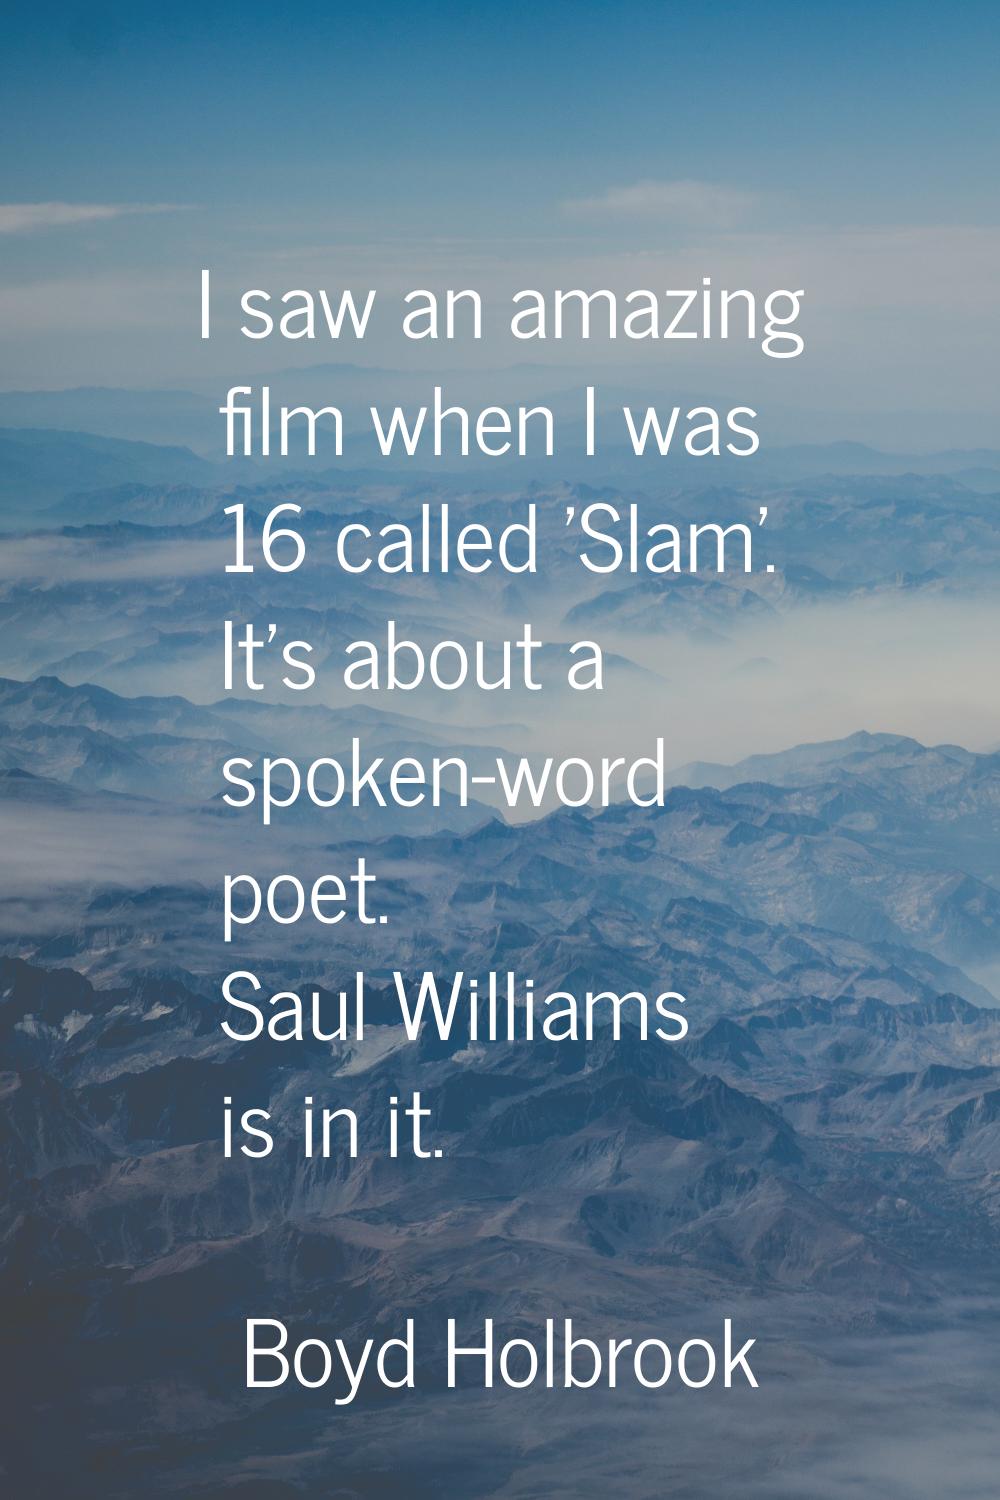 I saw an amazing film when I was 16 called 'Slam'. It's about a spoken-word poet. Saul Williams is 